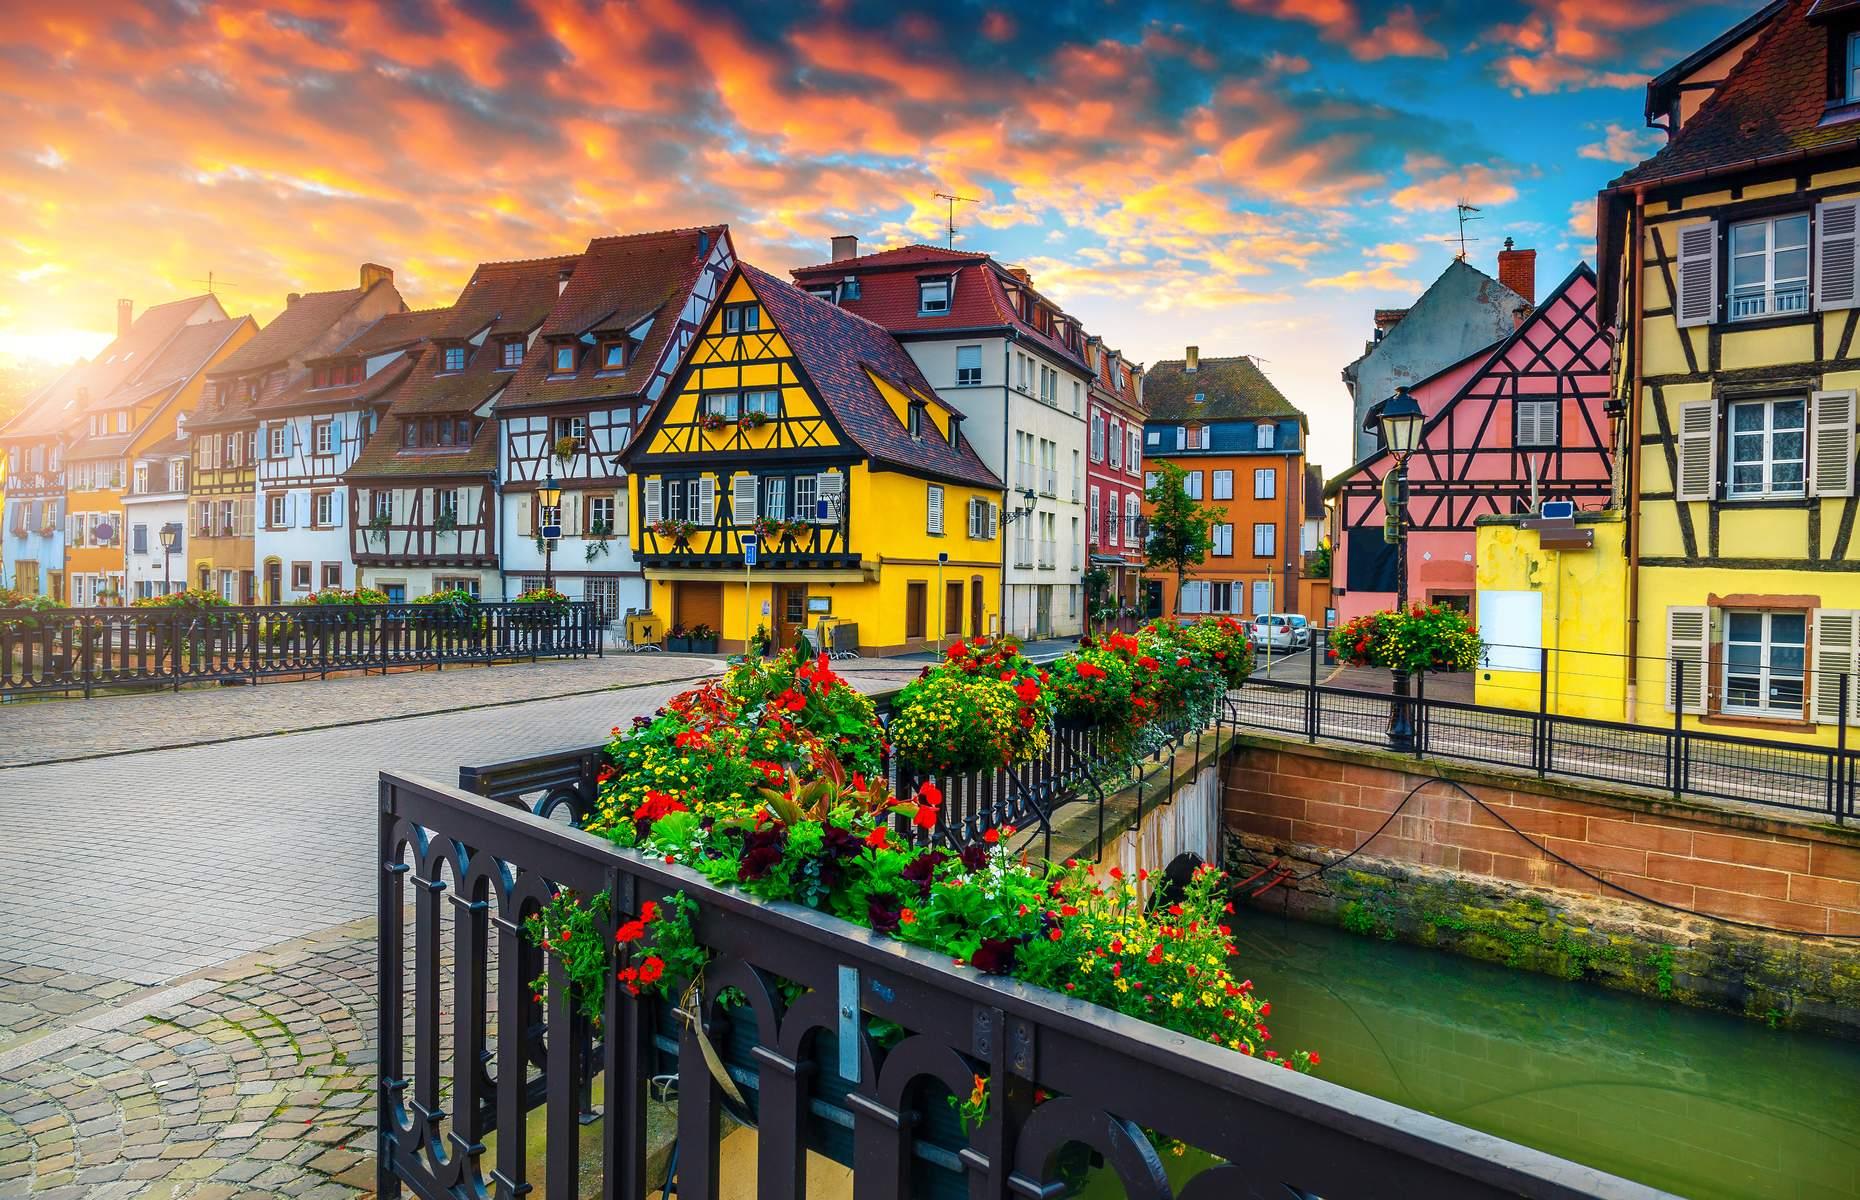 Painted in a joyful array of sweet-shop hues, the riverside village of Colmar is totally idyllic. Located in France’s Alsace region, near the German and Swiss borders, it’s full of historic treasures. Among them are Musée d'Unterlinden, a former convent turned museum; the home of Frédéric-Auguste Bartholdi, the sculptor who created the Statue of Liberty; and plenty of Alsatian Renaissance houses dating back to the 16th and 17th centuries.